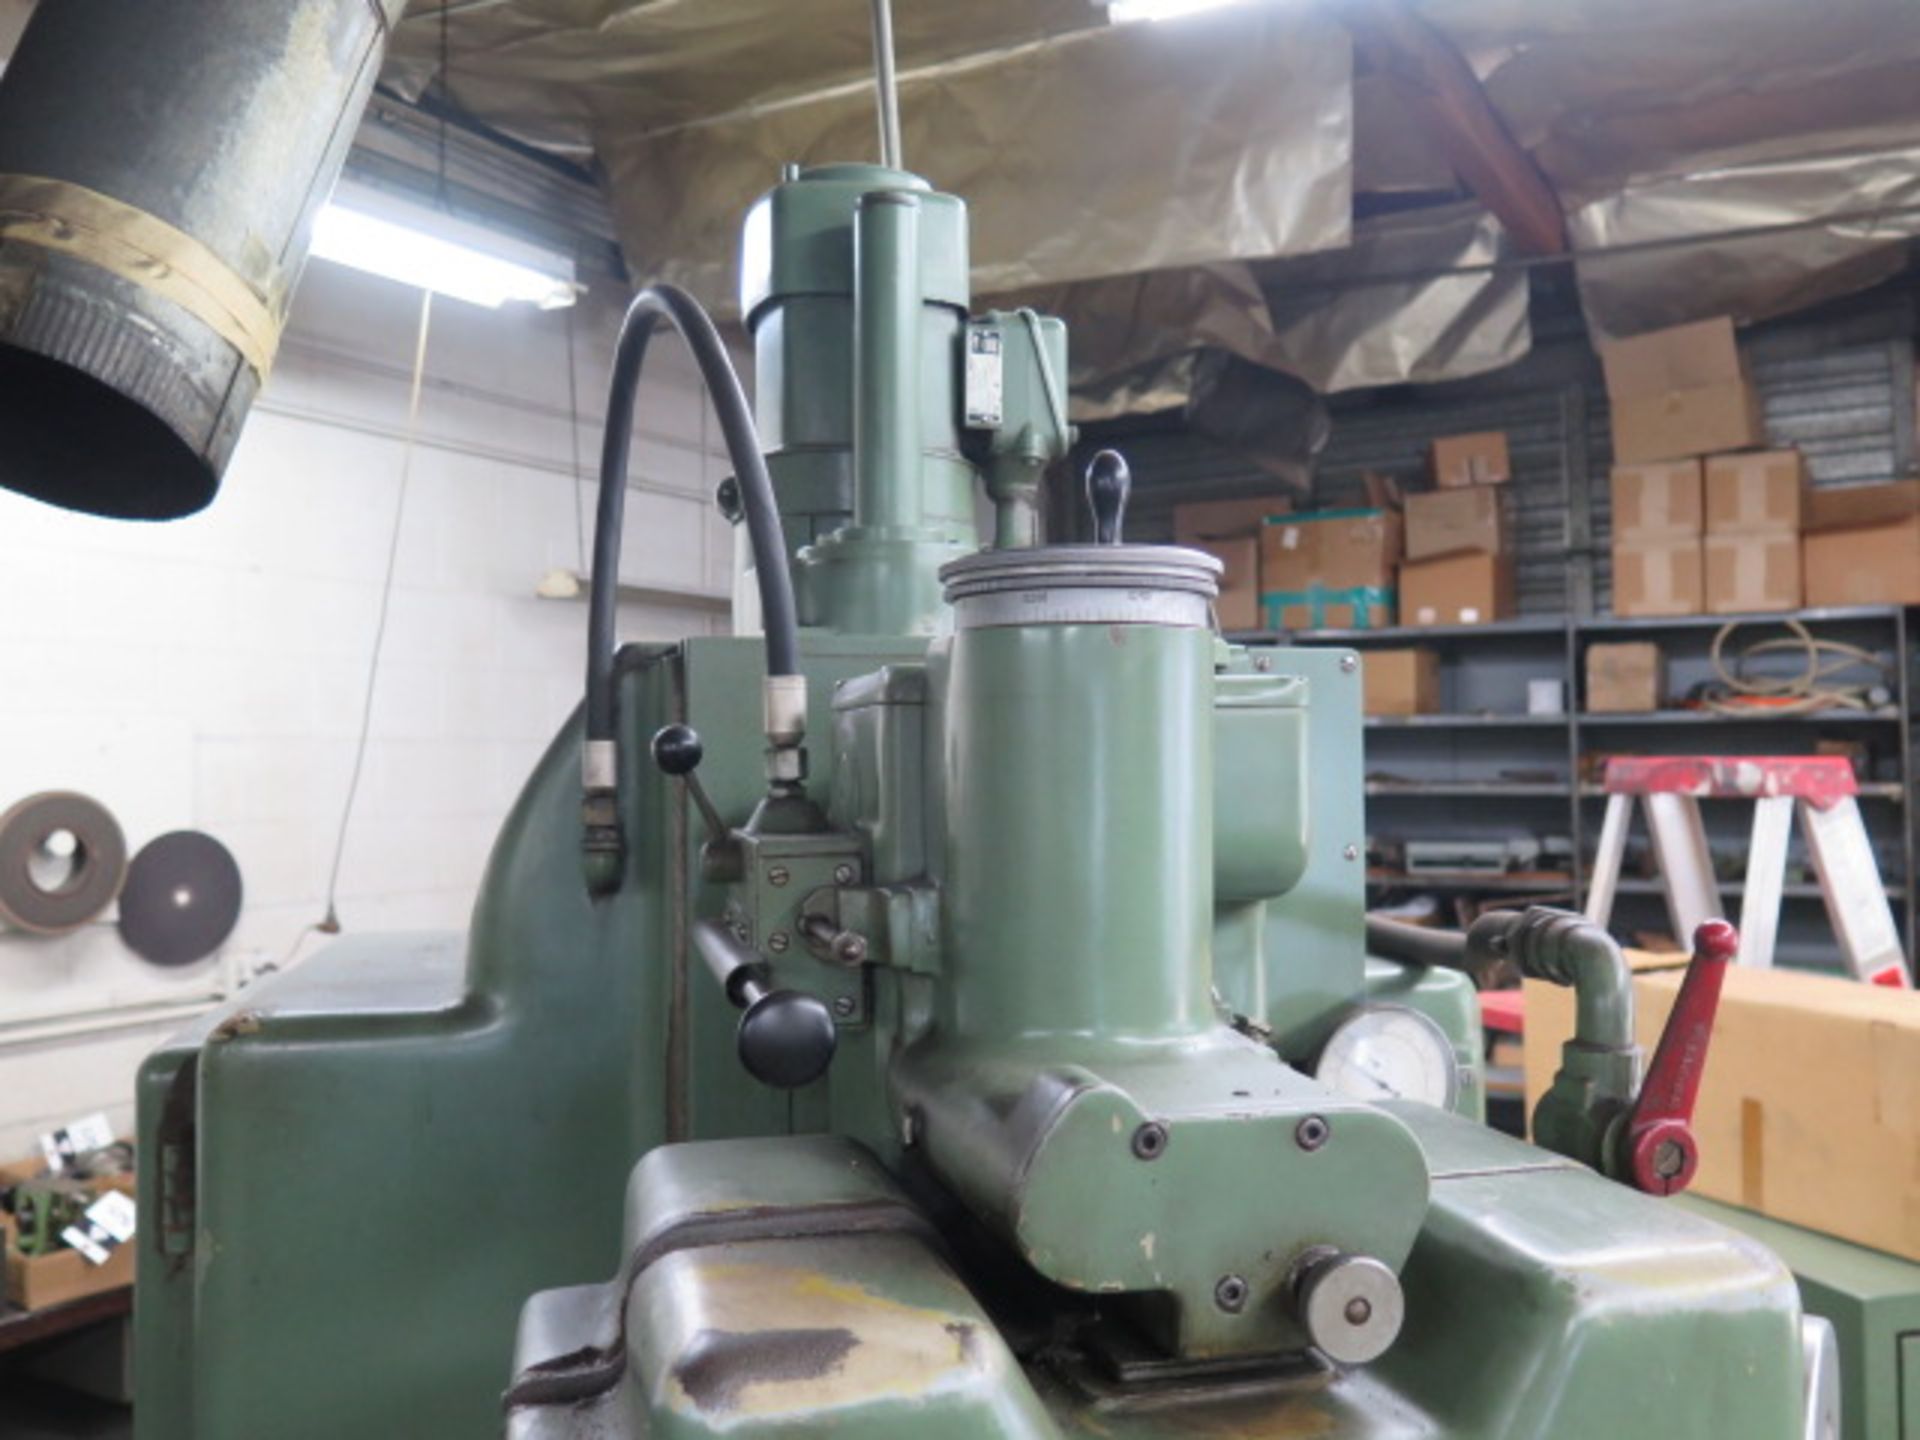 Magerle Type F-10 10" x 39 1/2" Automatic Hudraulic Surface Grinder s/n 585 w/ Magerle Controls, - Image 4 of 19